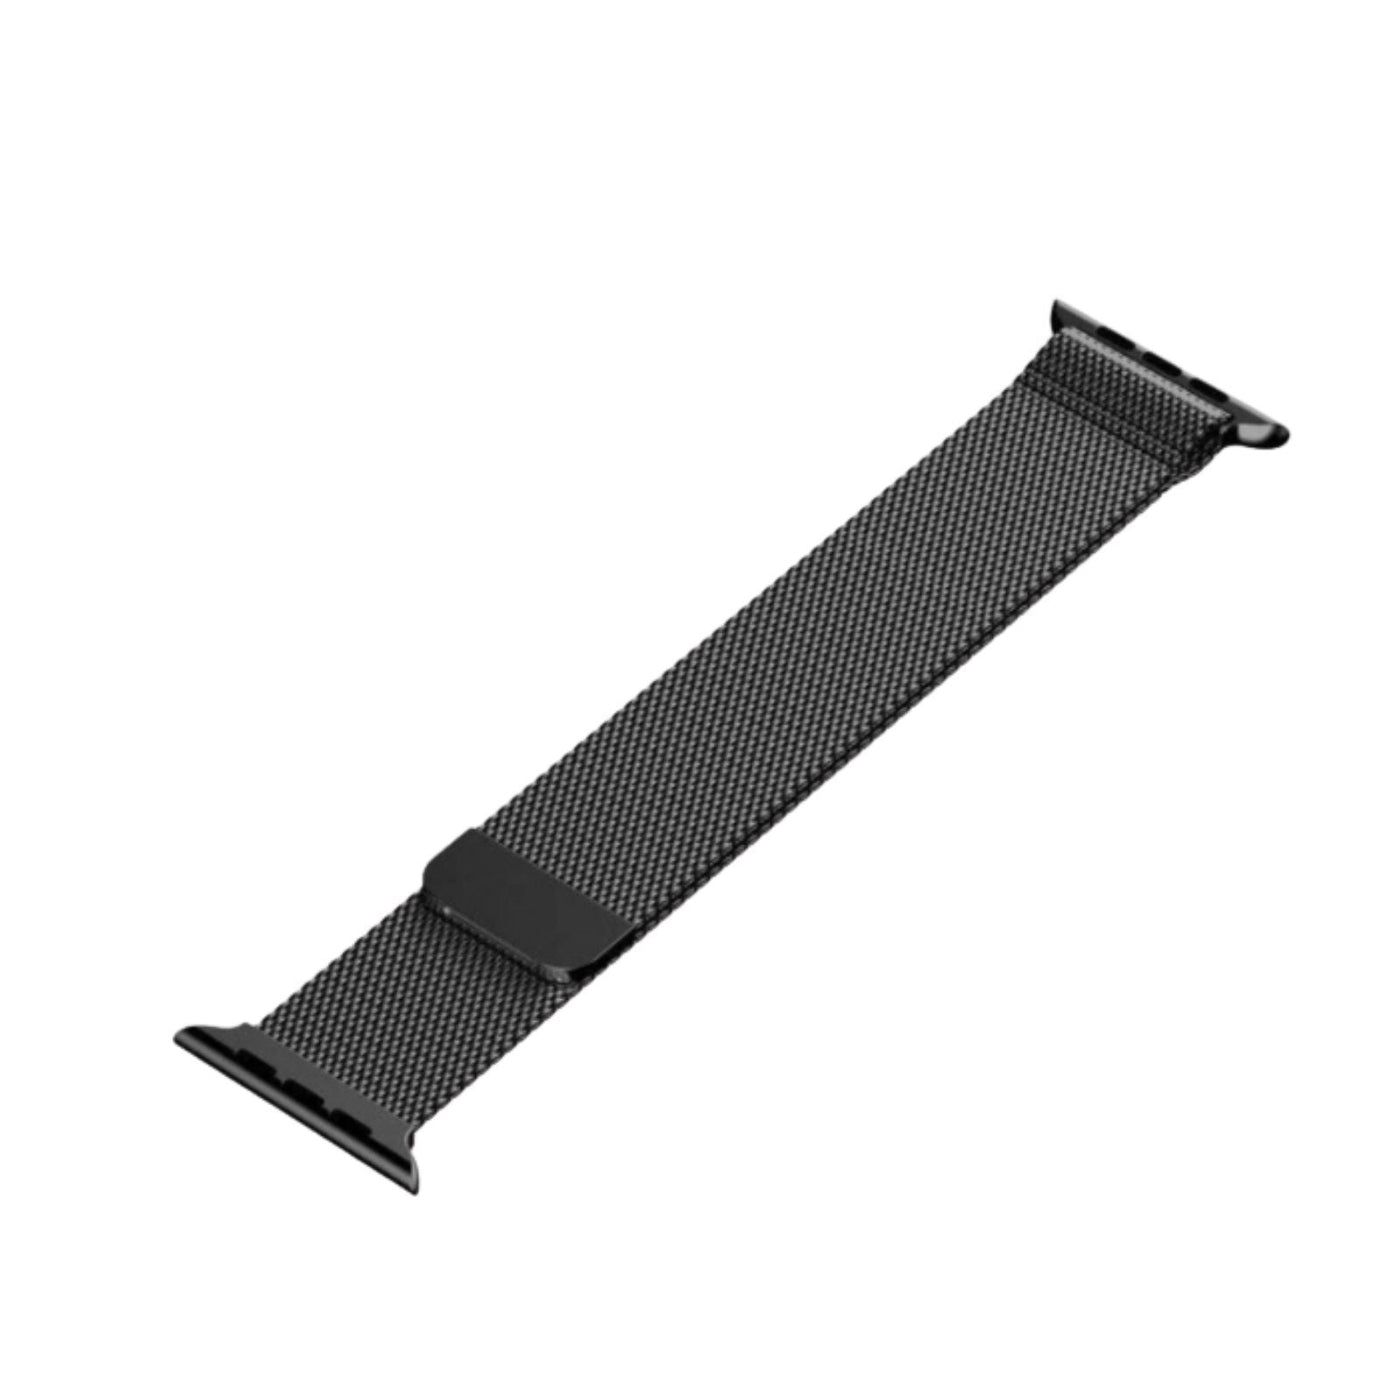 ALK Classic Milanese Band for Apple Watch in Grey - Alk Designs